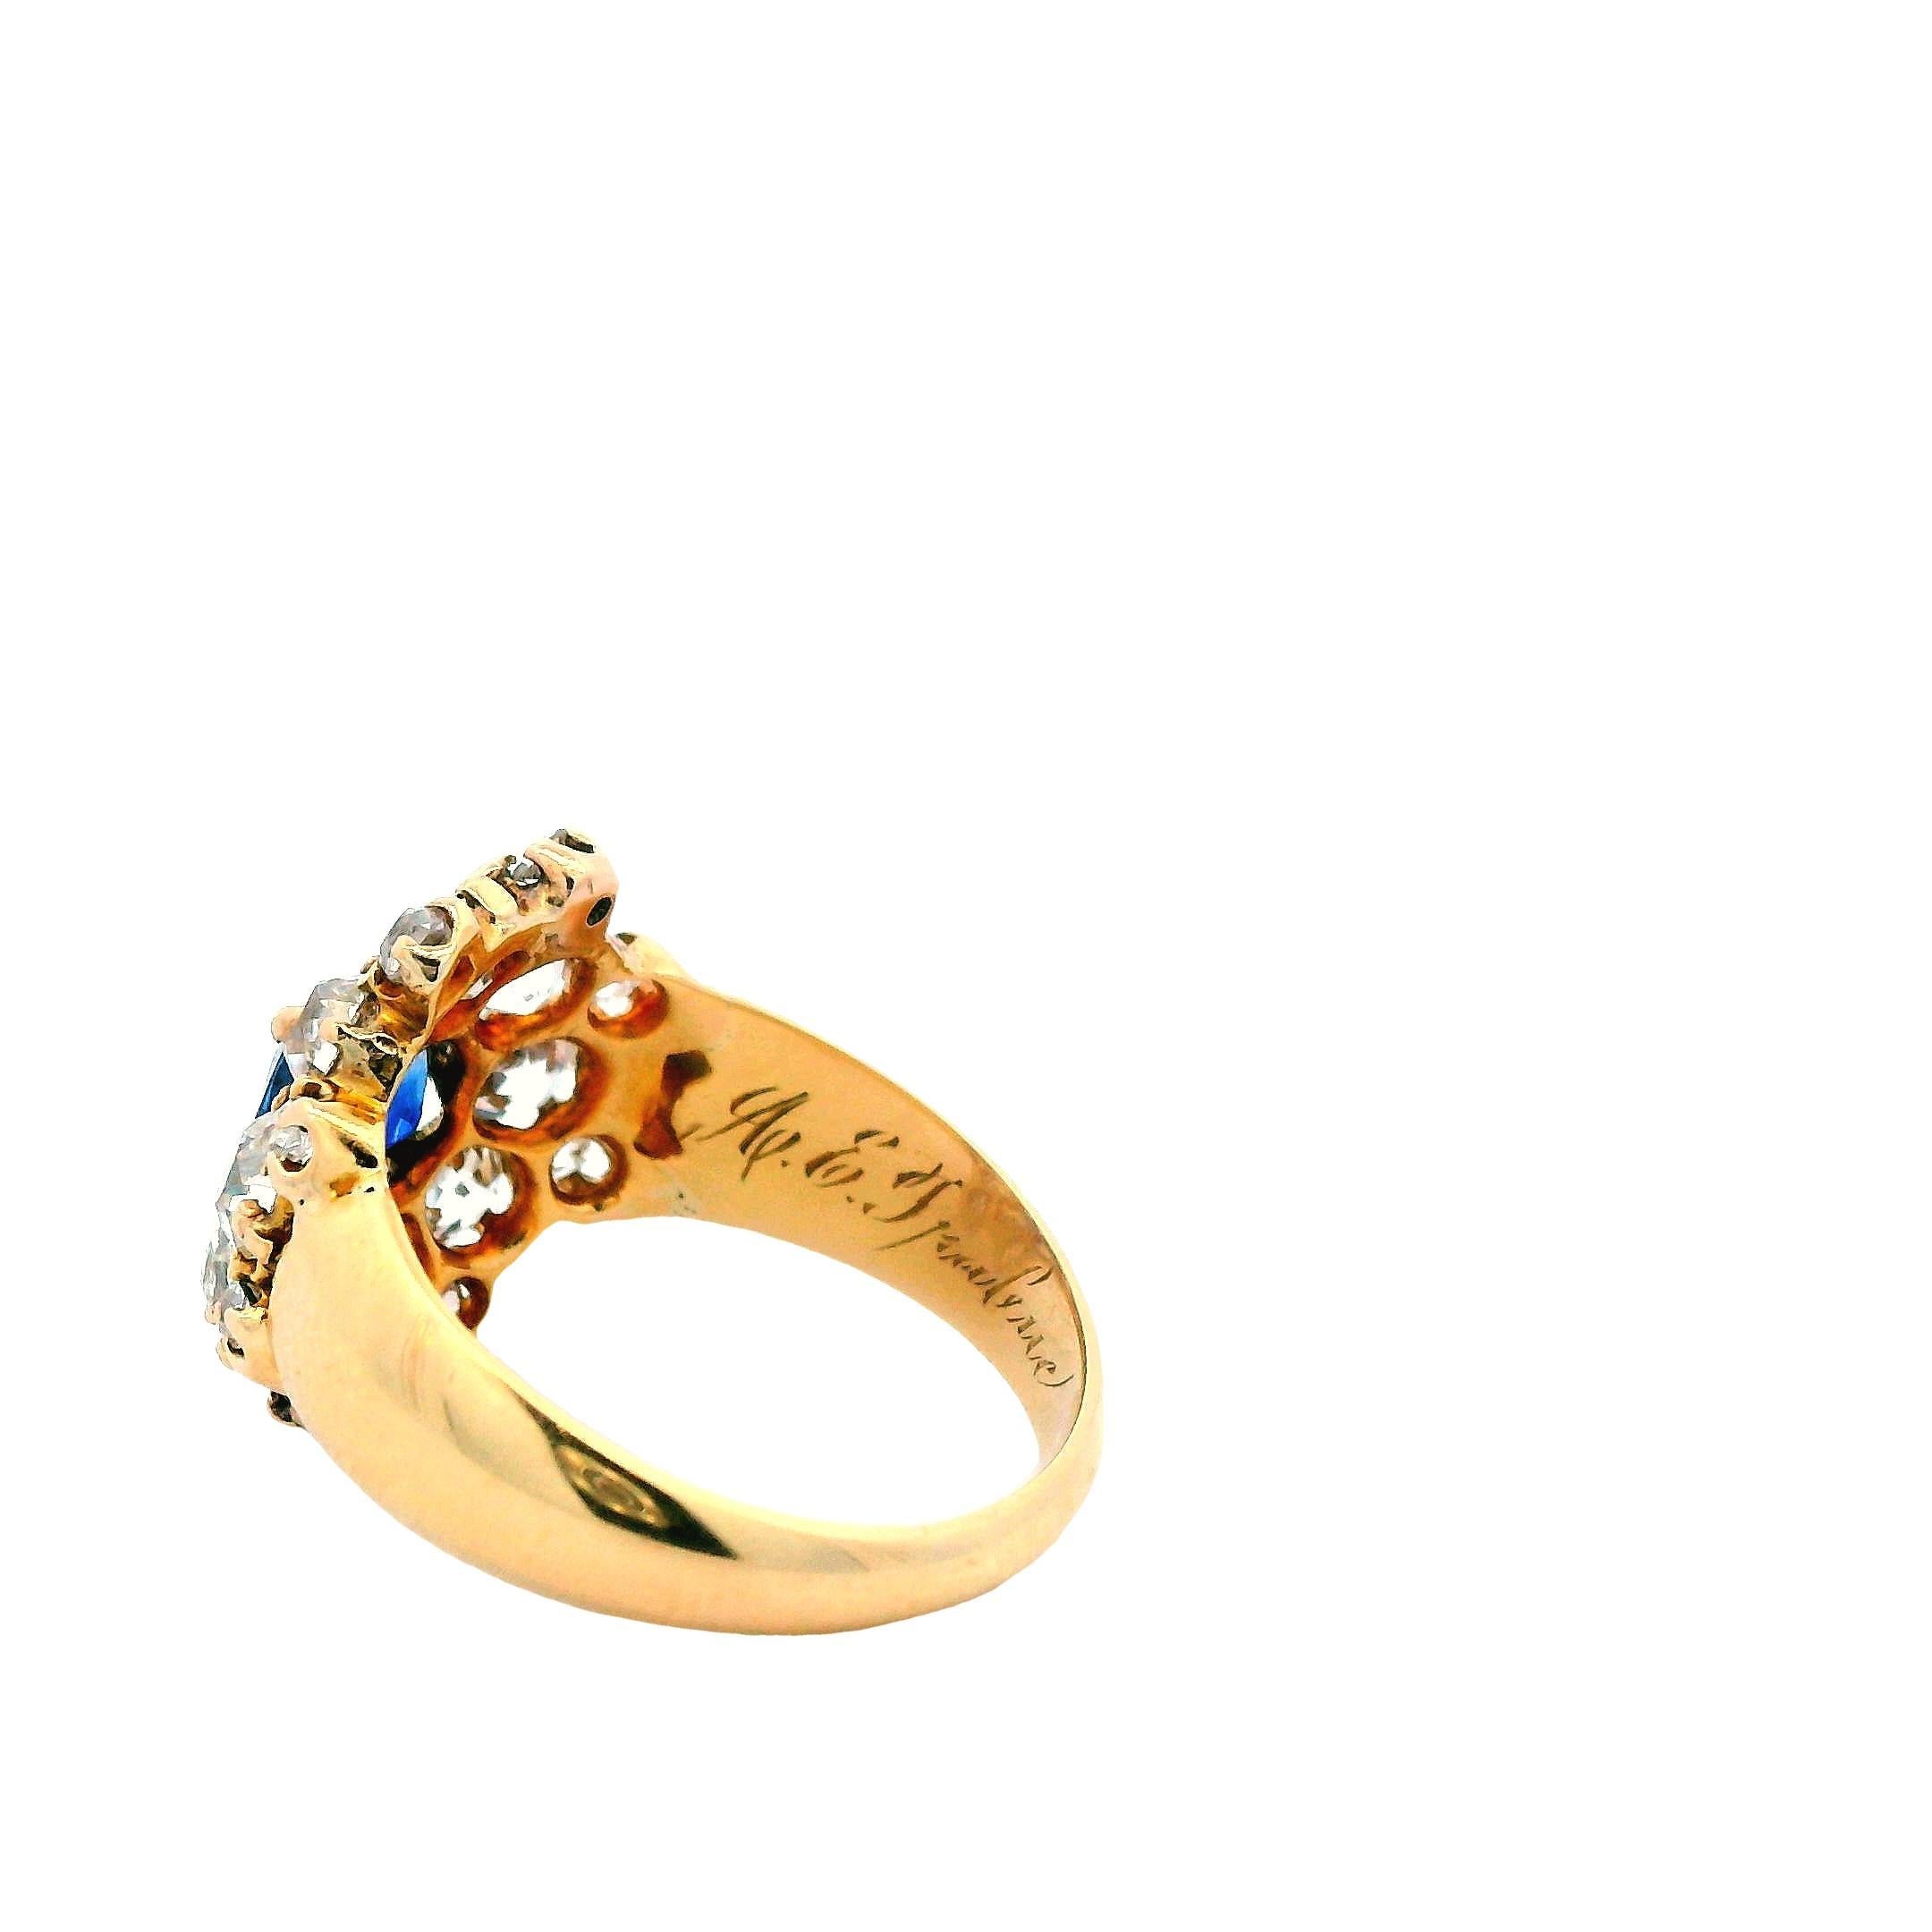 1890 Victorian 18K Yellow Gold Sapphire and Diamond Ring 3